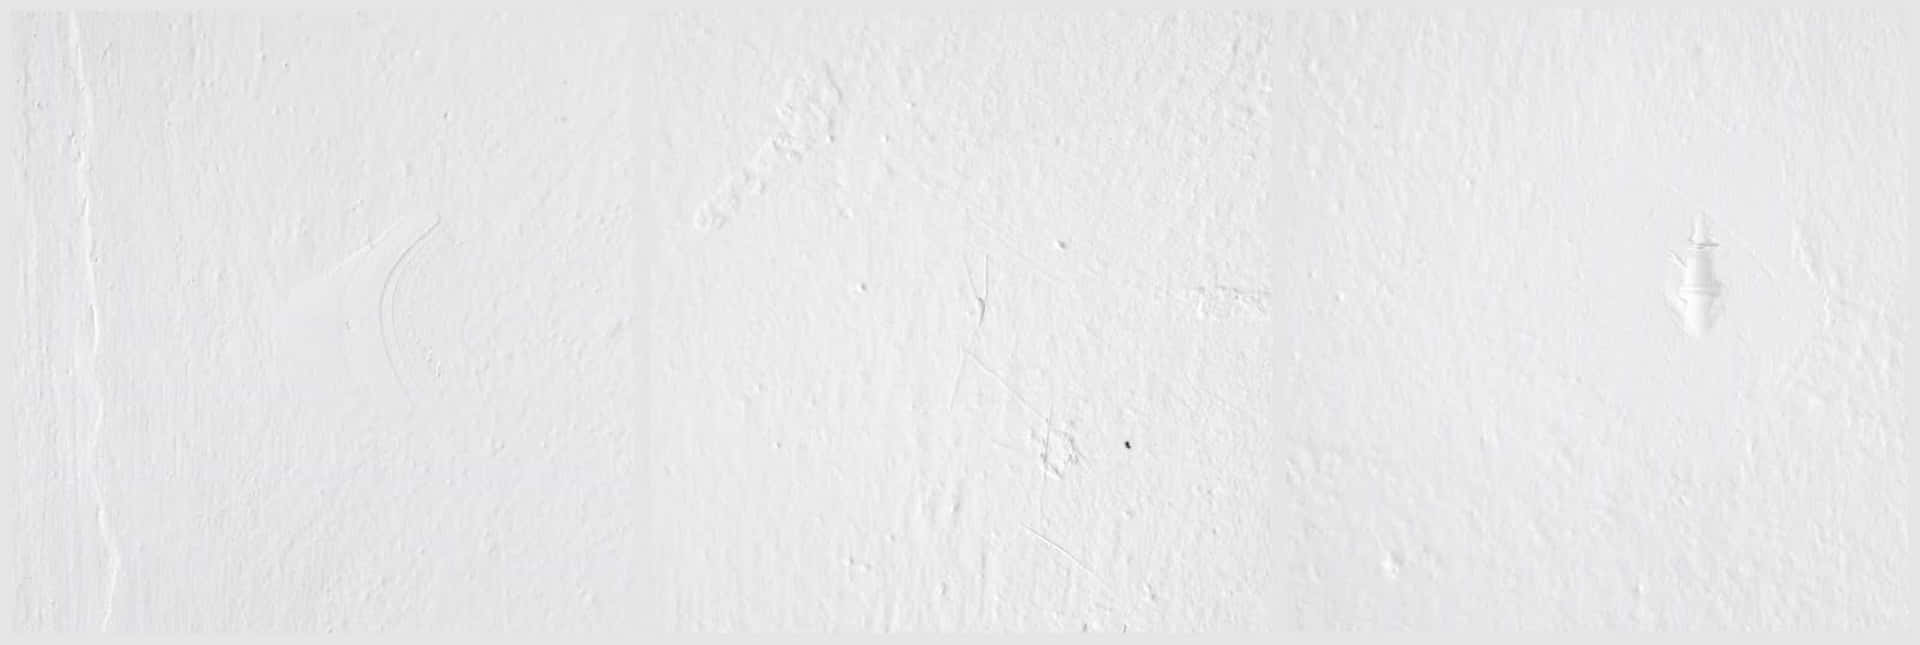 Ordinary White Wall Picture